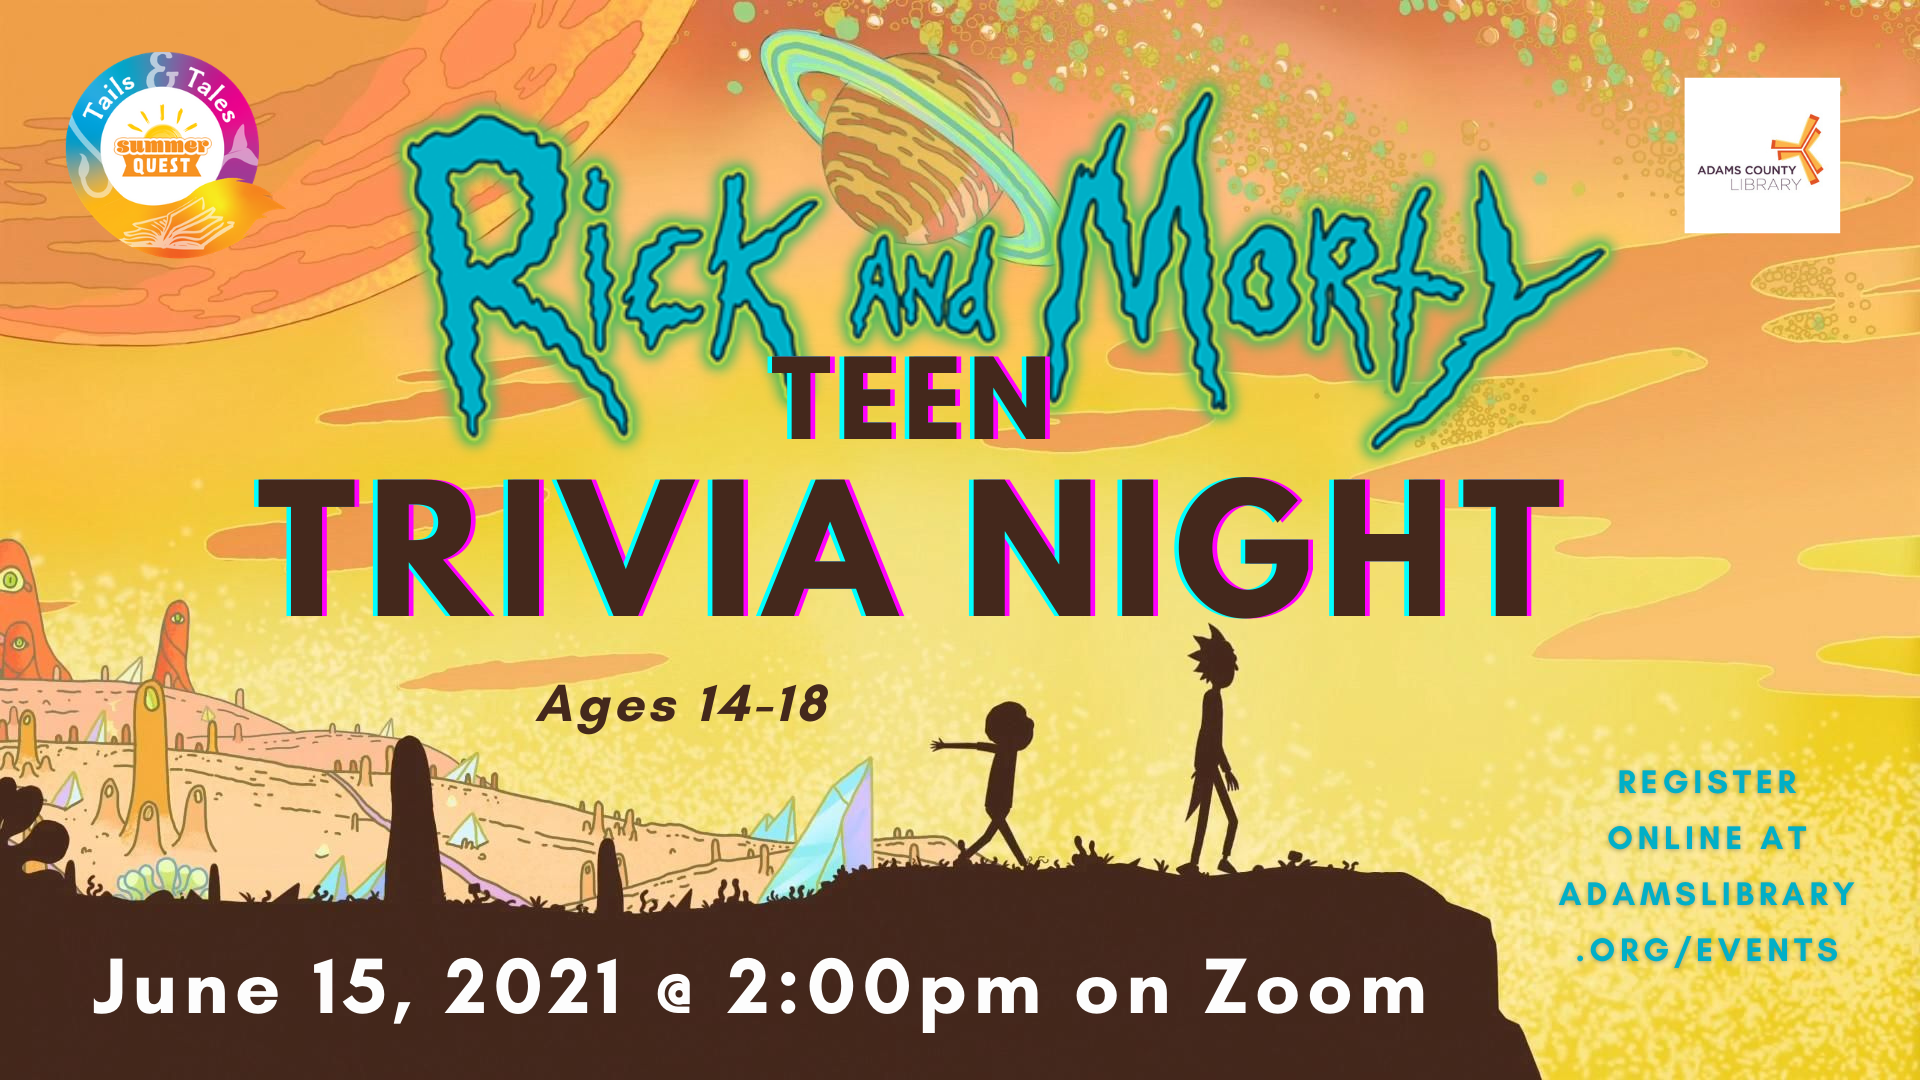 Join us for Teen Trivia Night featuring Rick & Morty on June 15, 2021 at 2:00pm!